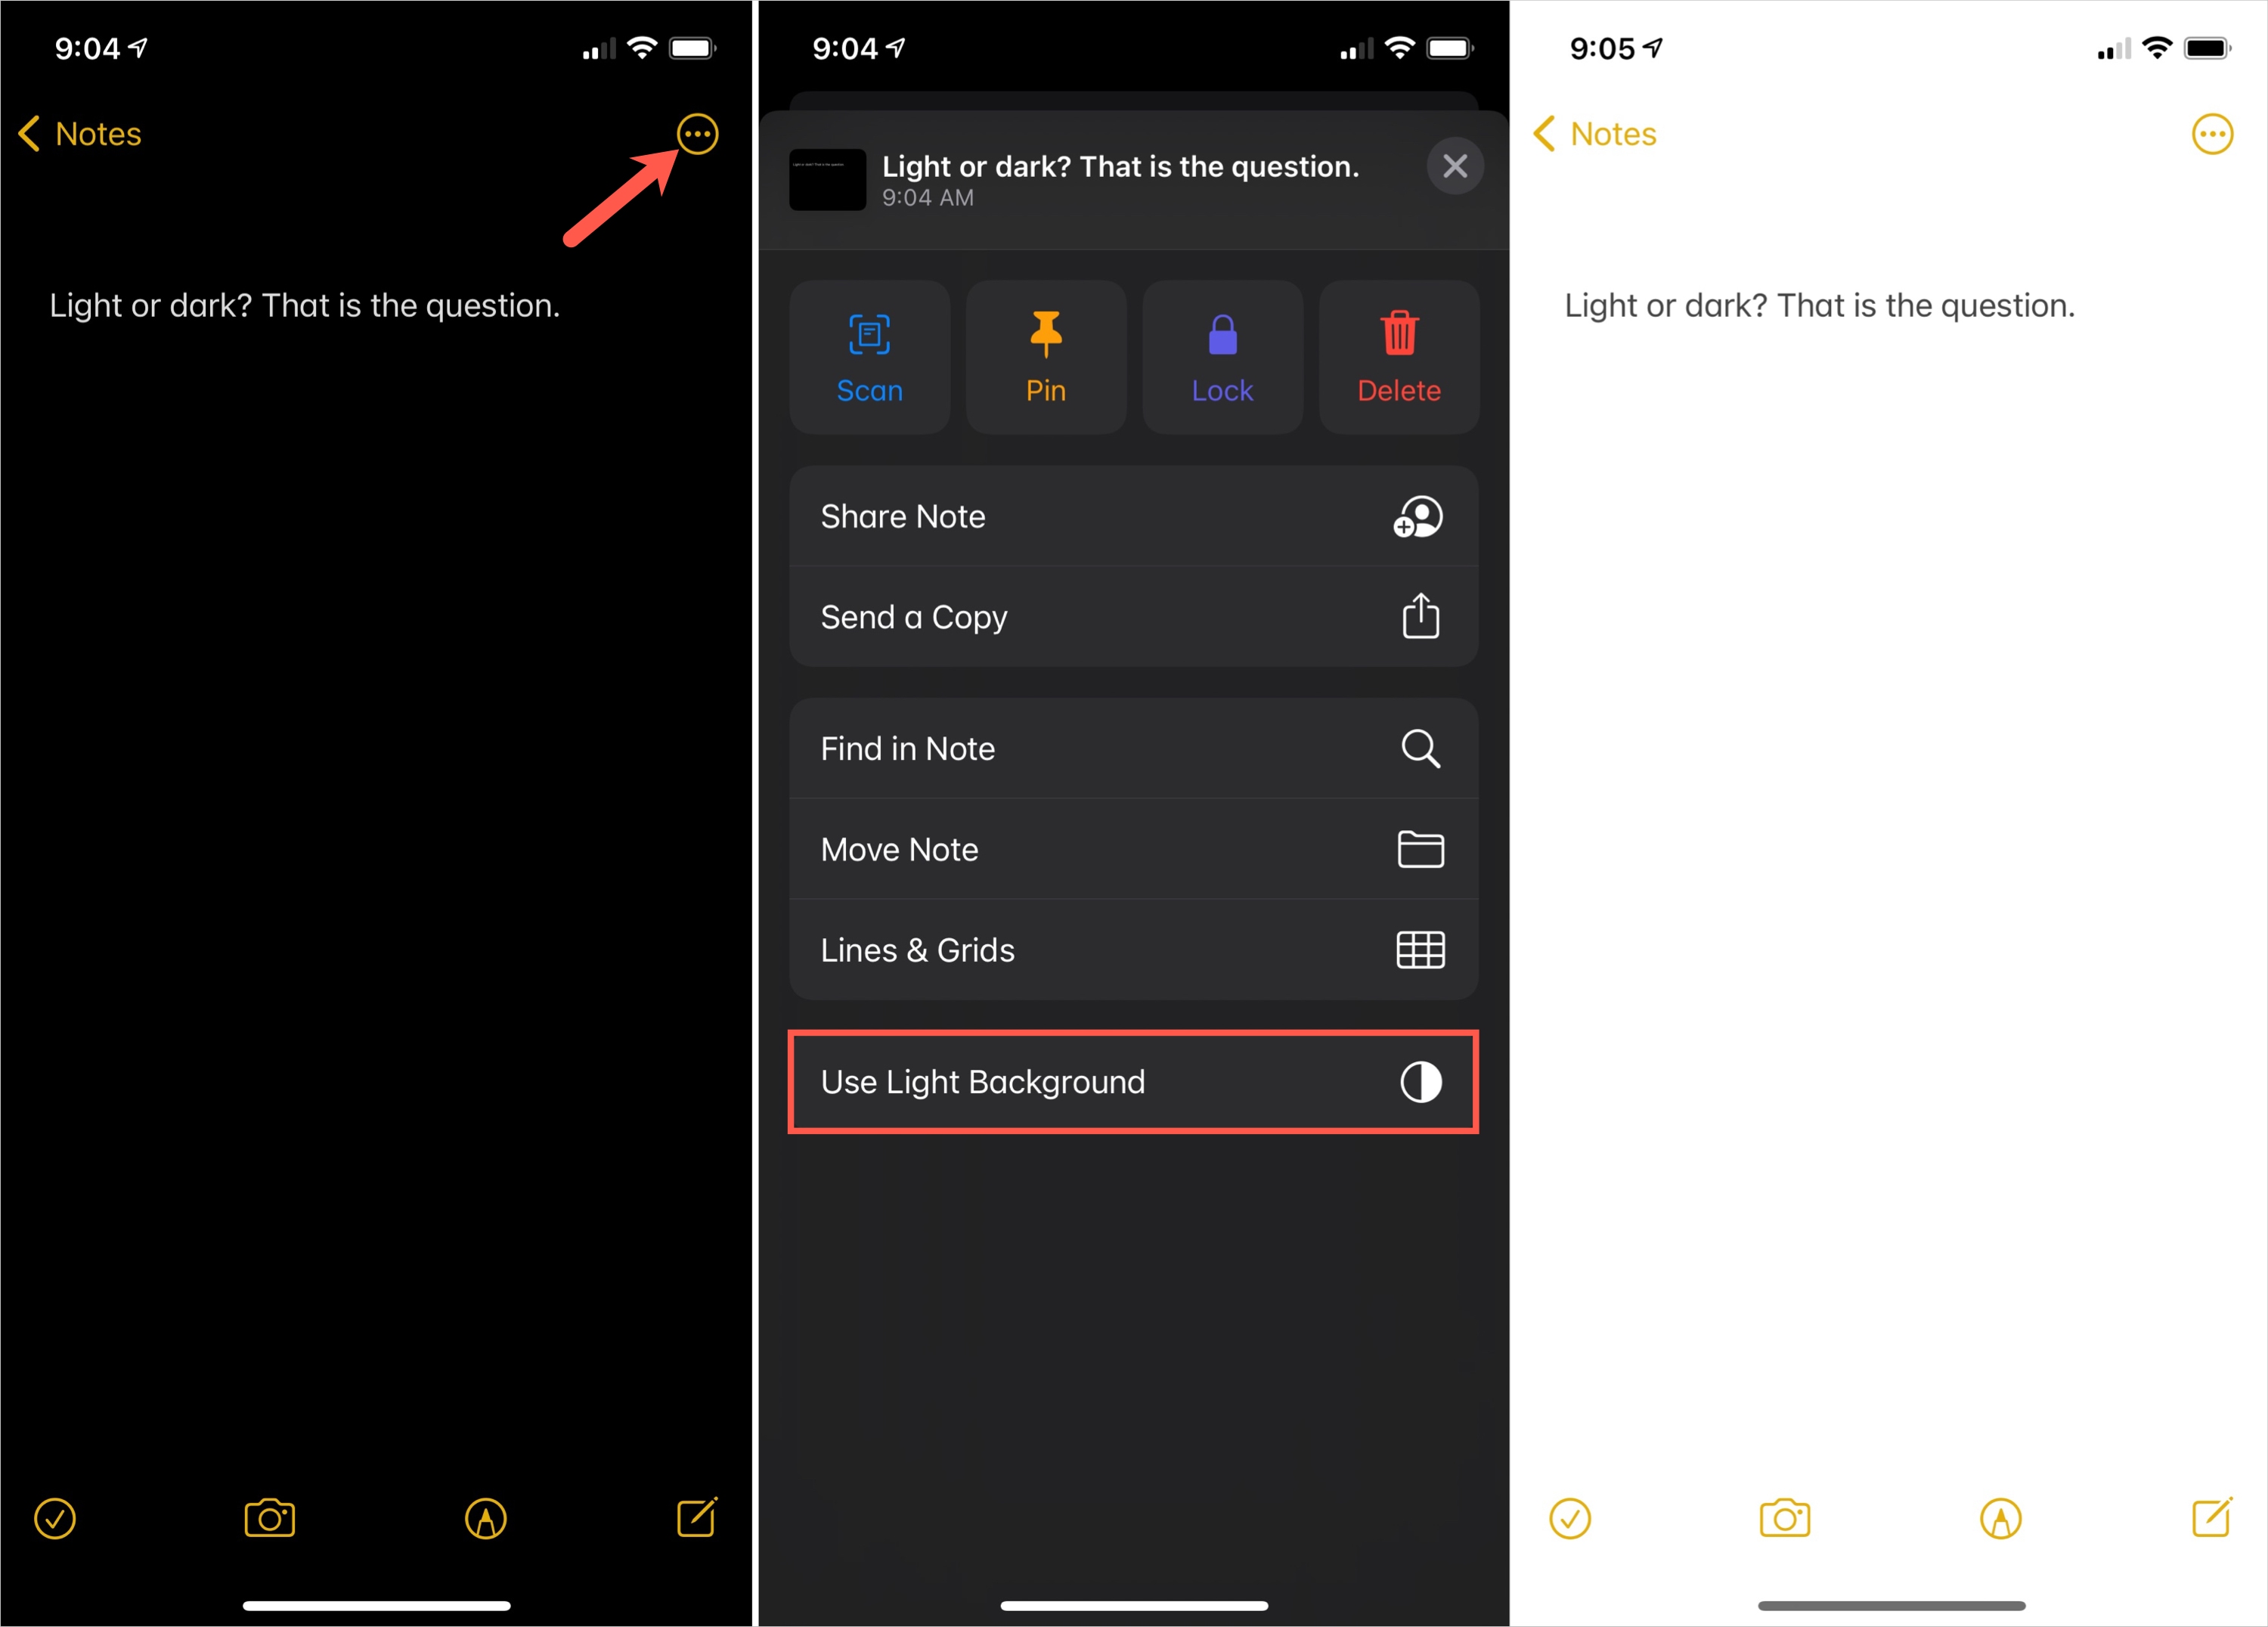 Notes Background Light in Dark Mode on iPhone